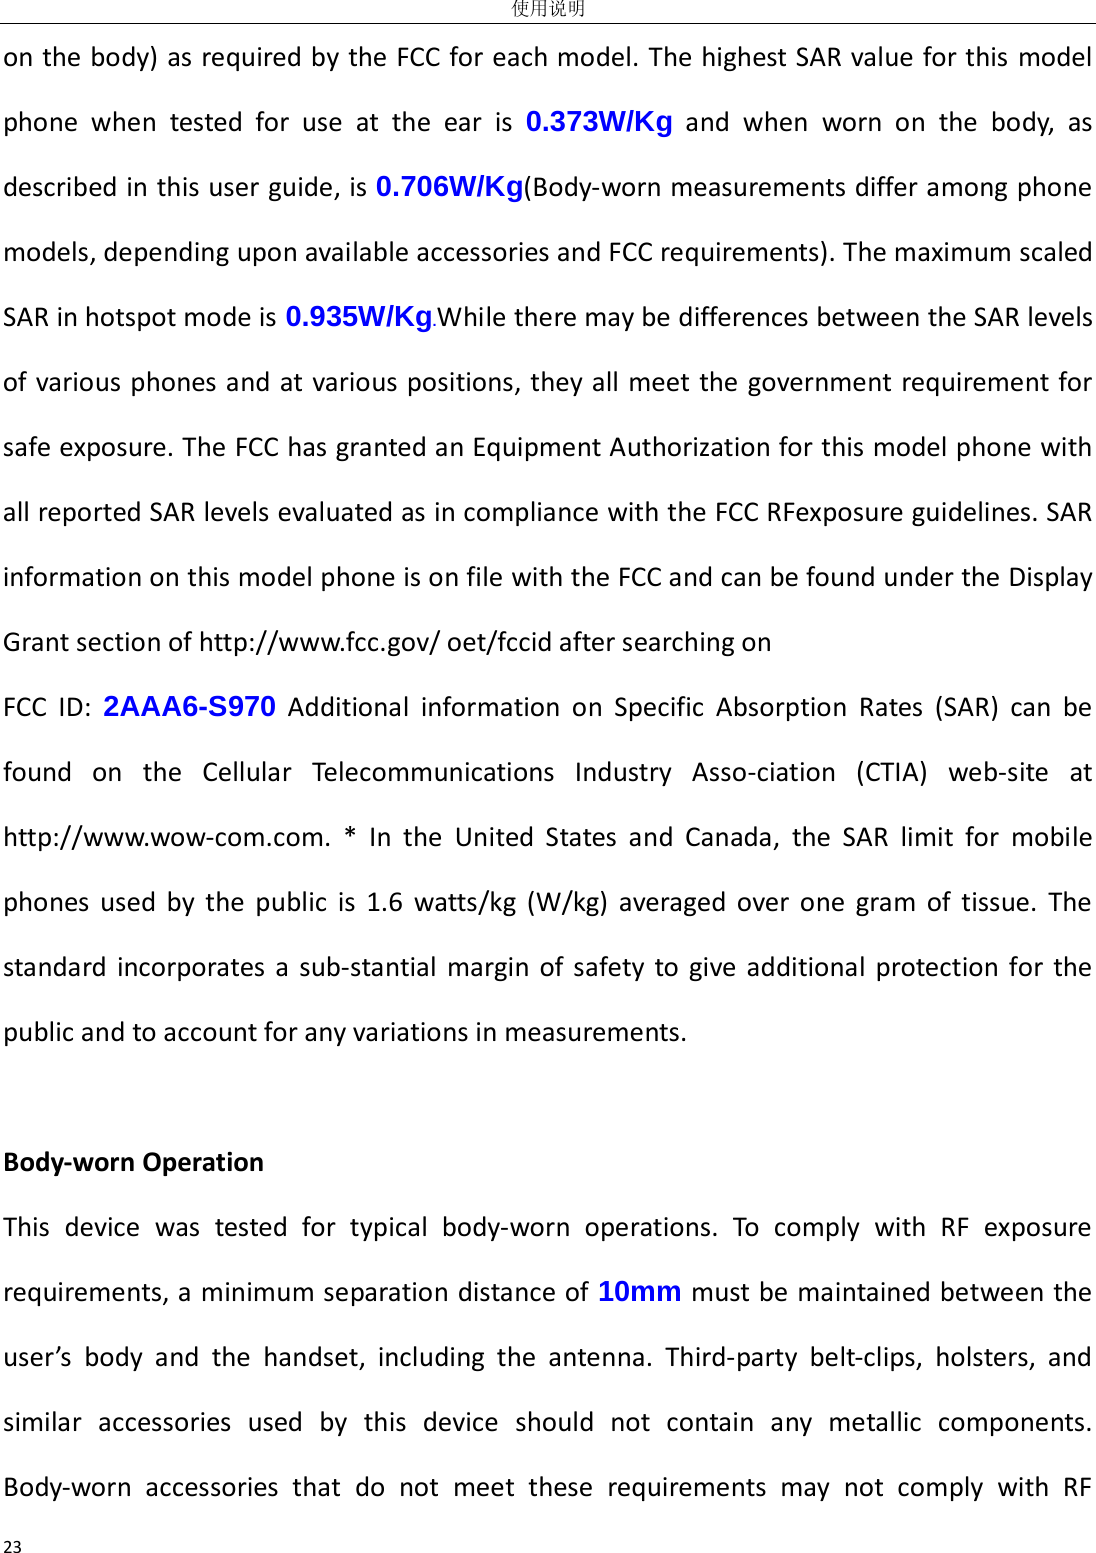 使用说明 23 on the body) as required by the FCC for each model. The highest SAR value for this model phone when tested for use at the ear is 0.373W/Kg and when worn on the body, as described in this user guide, is 0.706W/Kg(Body-worn measurements differ among phone models, depending upon available accessories and FCC requirements). The maximum scaled SAR in hotspot mode is 0.935W/Kg.While there may be differences between the SAR levels of various phones and at various positions, they all meet the government requirement for safe exposure. The FCC has granted an Equipment Authorization for this model phone with all reported SAR levels evaluated as in compliance with the FCC RFexposure guidelines. SAR information on this model phone is on file with the FCC and can be found under the Display Grant section of http://www.fcc.gov/ oet/fccid after searching on   FCC ID: 2AAA6-S970 Additional information on Specific Absorption Rates (SAR) can be found on the Cellular Telecommunications Industry Asso-ciation (CTIA) web-site at http://www.wow-com.com. * In the United States and Canada, the SAR limit for mobile phones used by the public is 1.6 watts/kg (W/kg) averaged over one gram of tissue. The standard incorporates a sub-stantial margin of safety to give additional protection for the public and to account for any variations in measurements.  Body-worn Operation This device was tested for typical body-worn operations. To comply with RF exposure requirements, a minimum separation distance of 10mm must be maintained between the user’s body and the handset, including the antenna. Third-party belt-clips, holsters, and similar accessories used by this device should not contain any metallic components. Body-worn accessories that do not meet these requirements may not comply with RF 